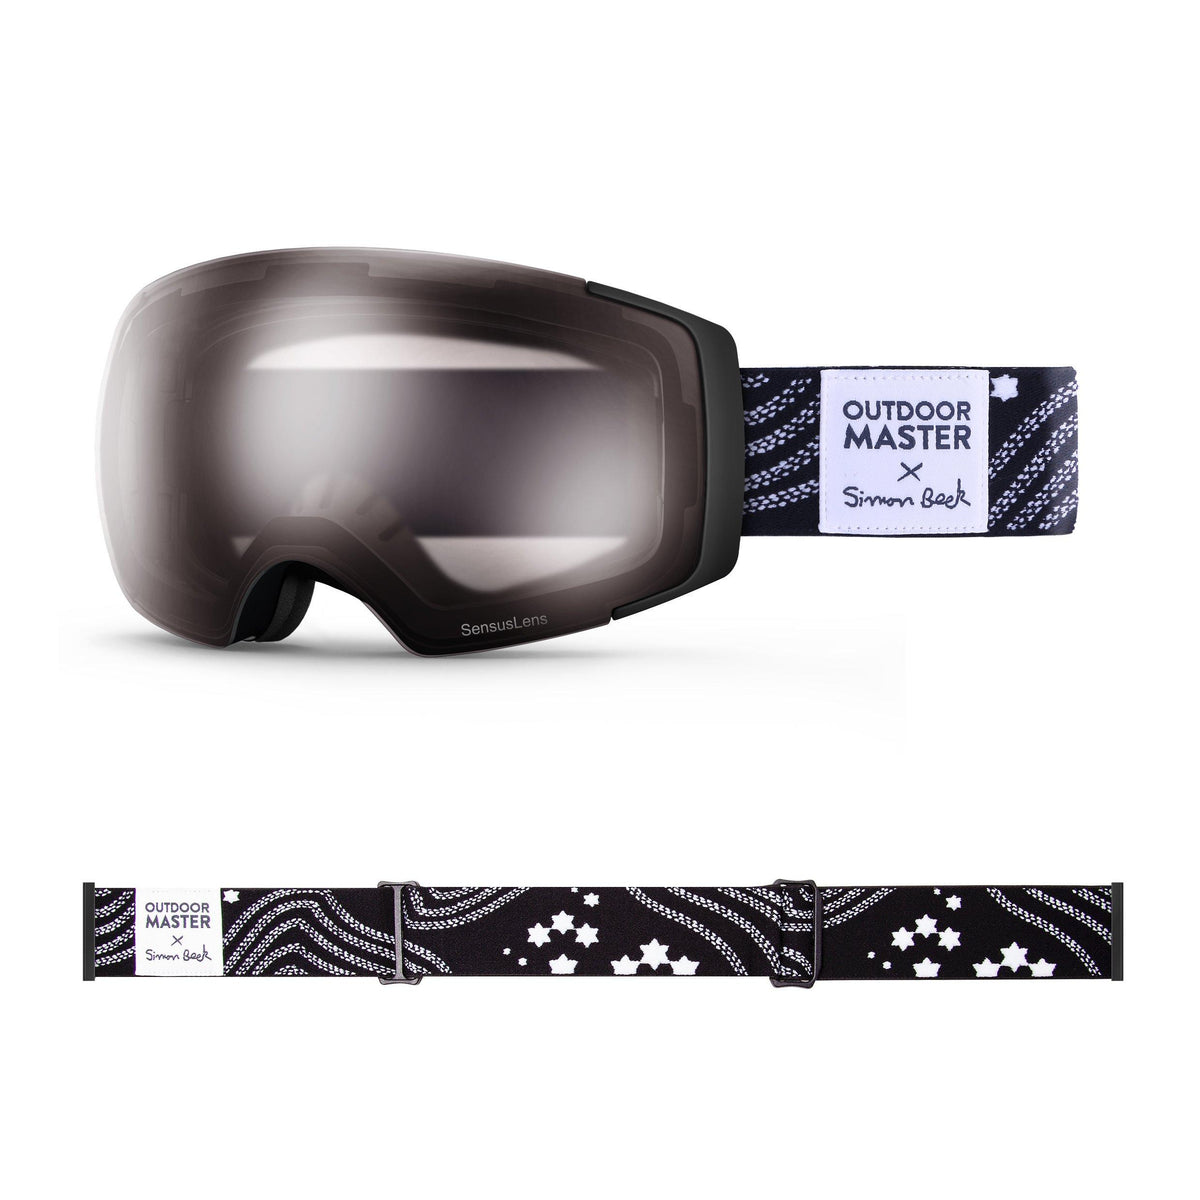 OutdoorMaster x Simon Beck Ski Goggles Pro Series - Snowshoeing Art Limited Edition OutdoorMaster SensusLens VLT40-80% Photochromatic Clear to Pink Star Road-Black